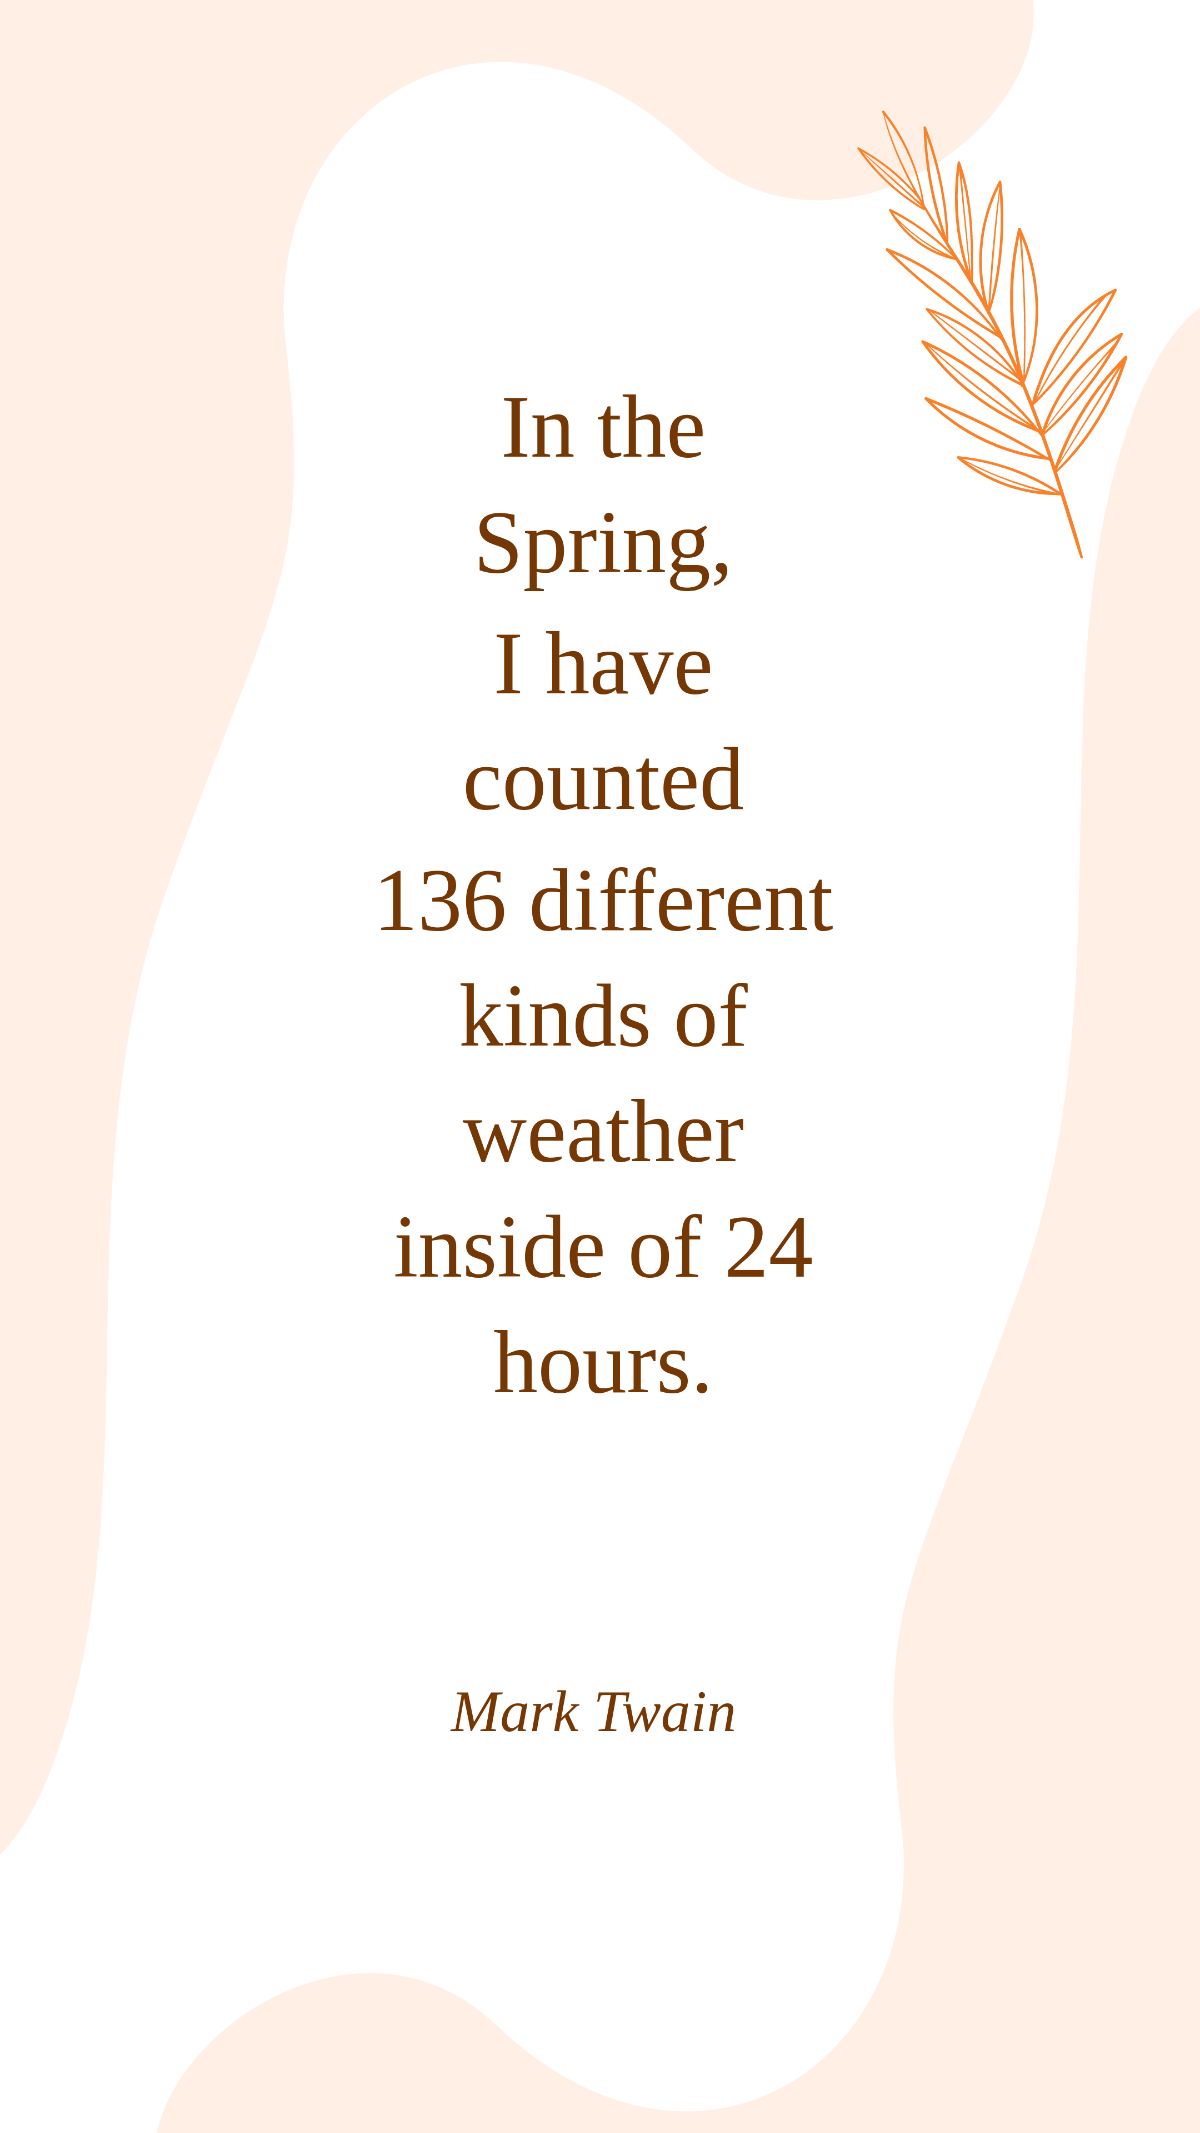 Mark Twain - In the Spring, I have counted 136 different kinds of weather inside of 24 hours.